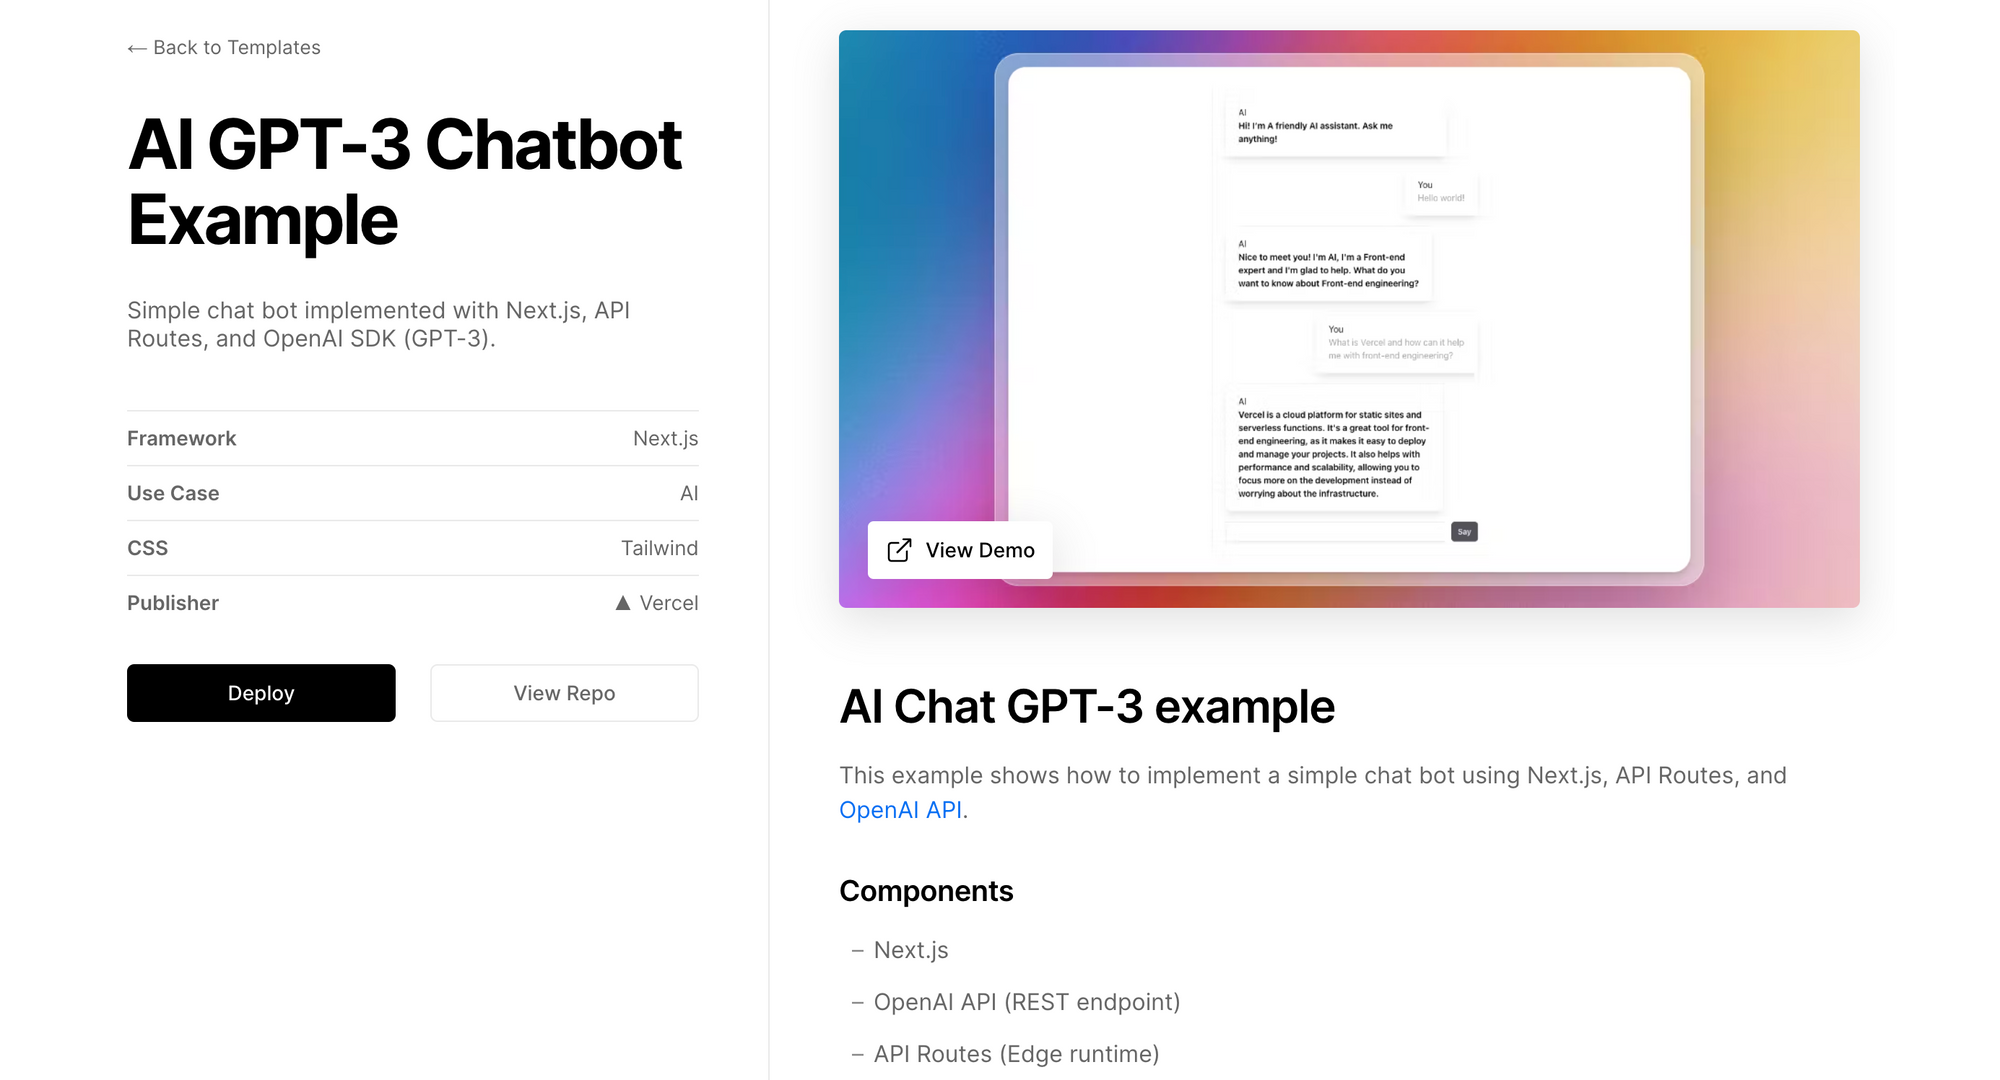 AI GPT-3 Chatbot starter template from Vercel